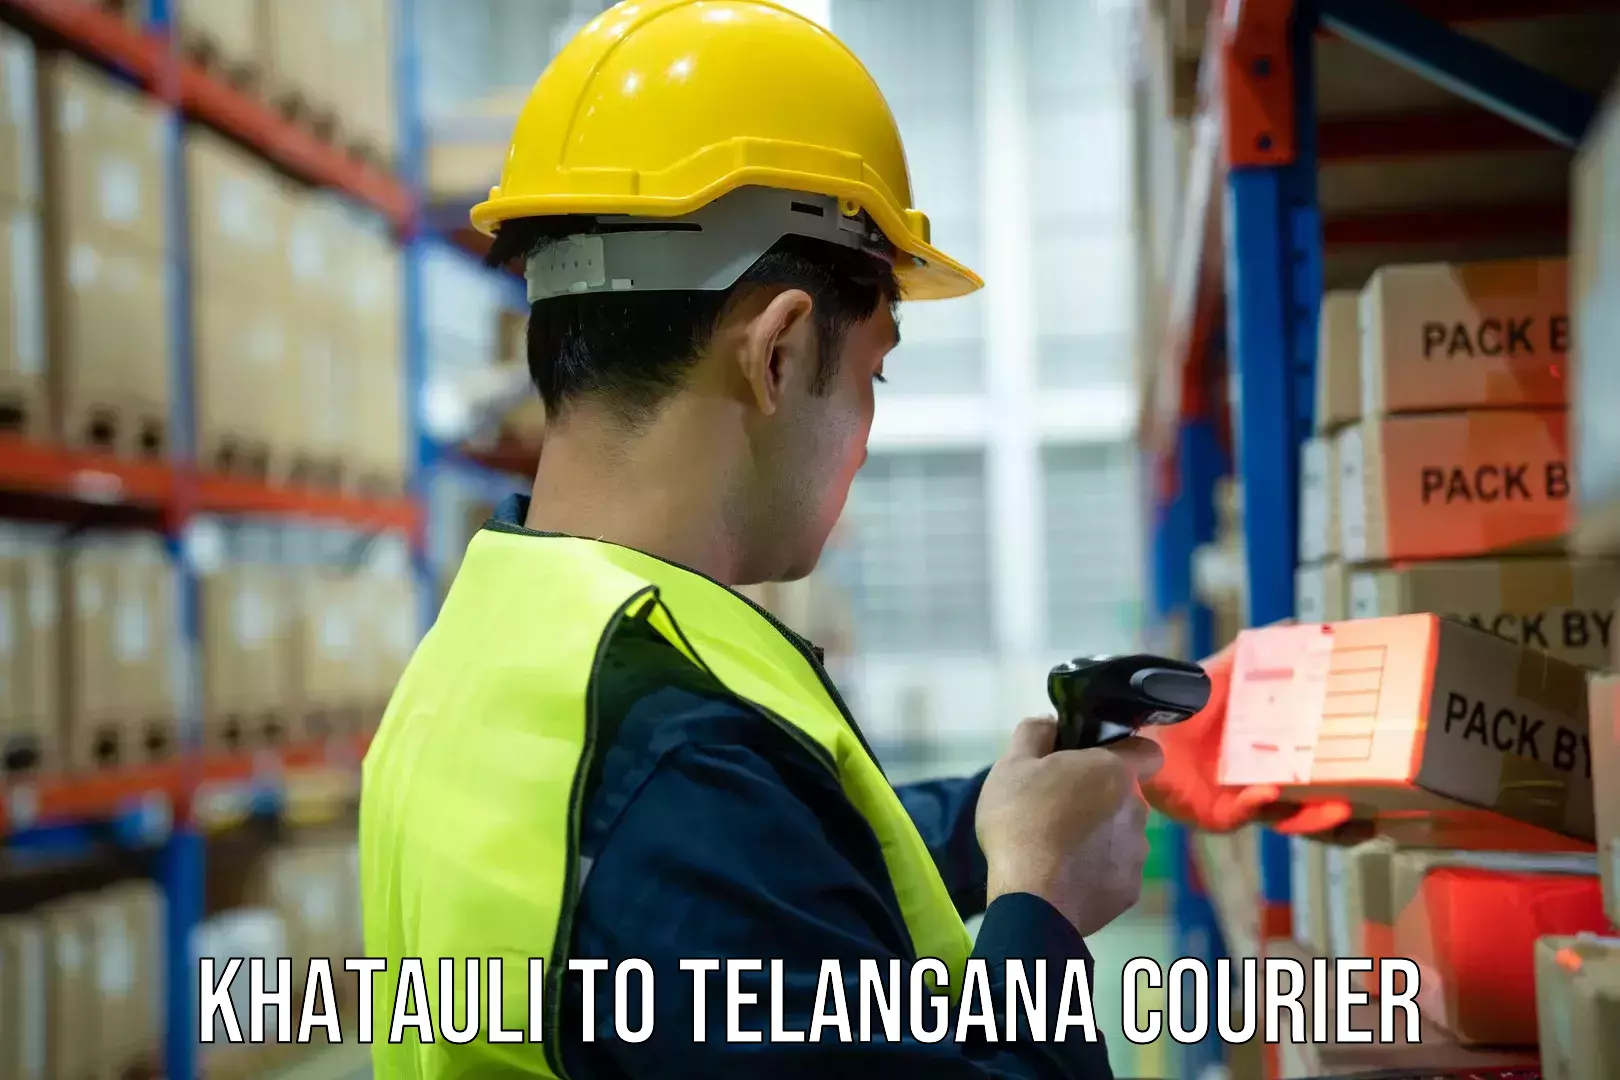 End-to-end delivery Khatauli to Telangana